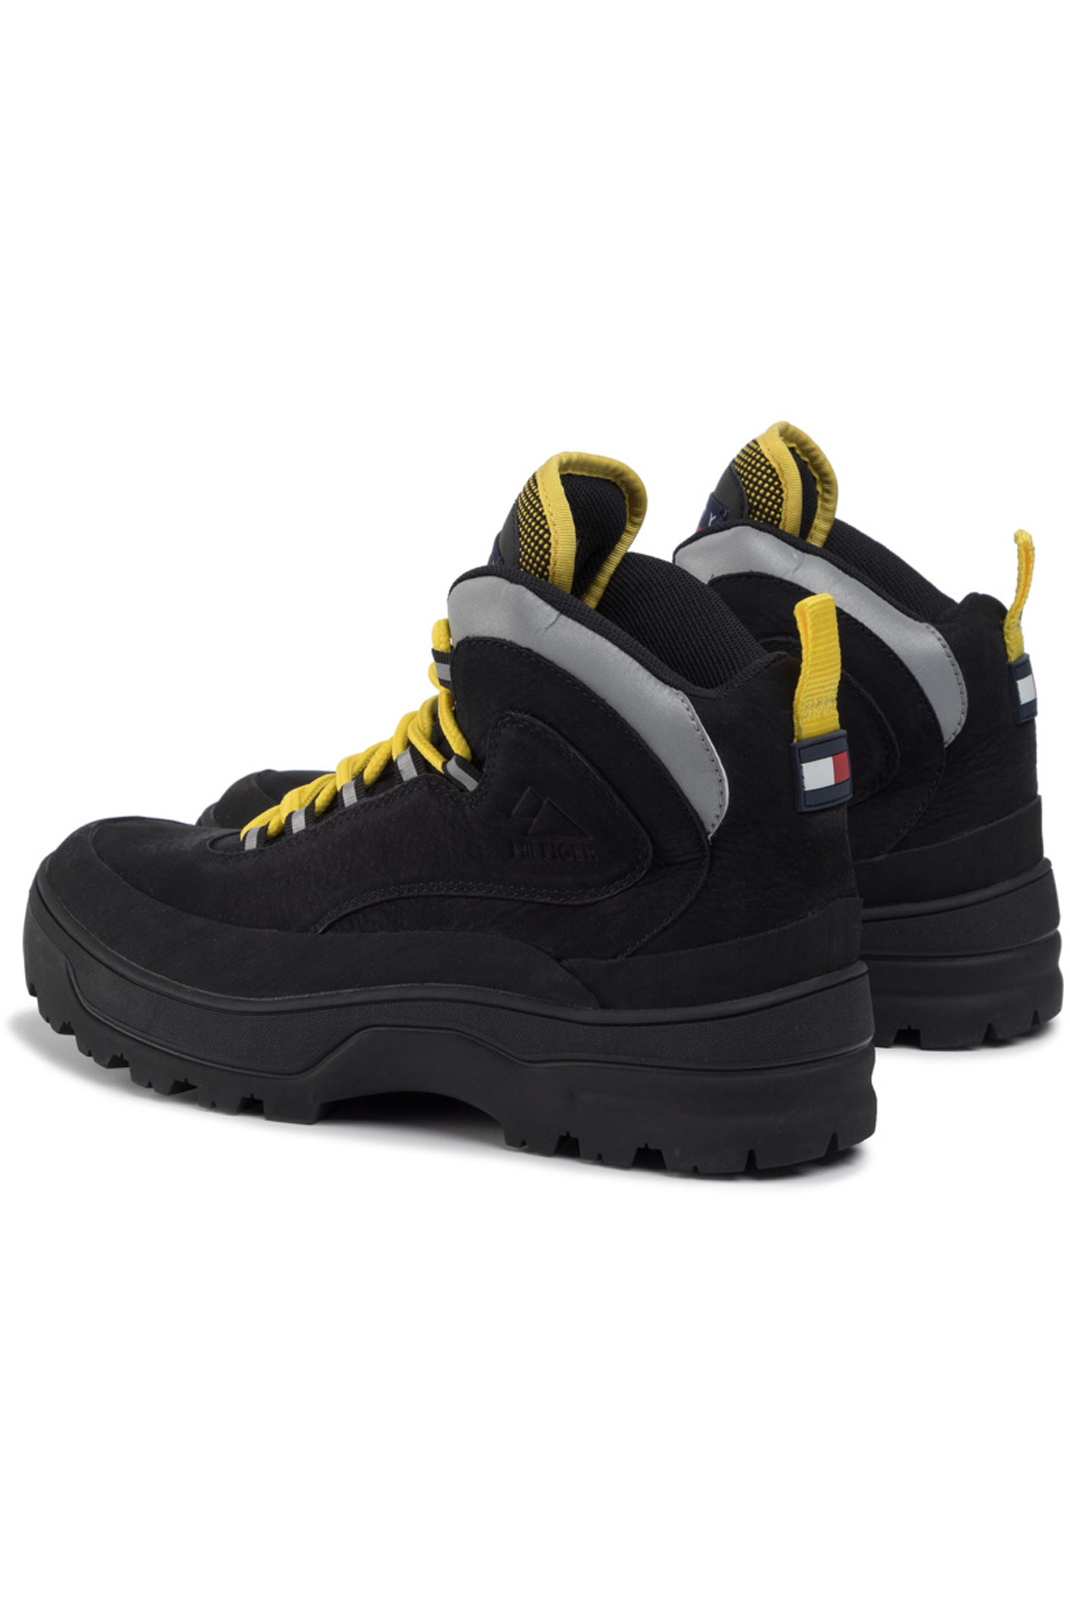 Tommy Jeans Hilfiger Boots Chaussure Noir Expedition